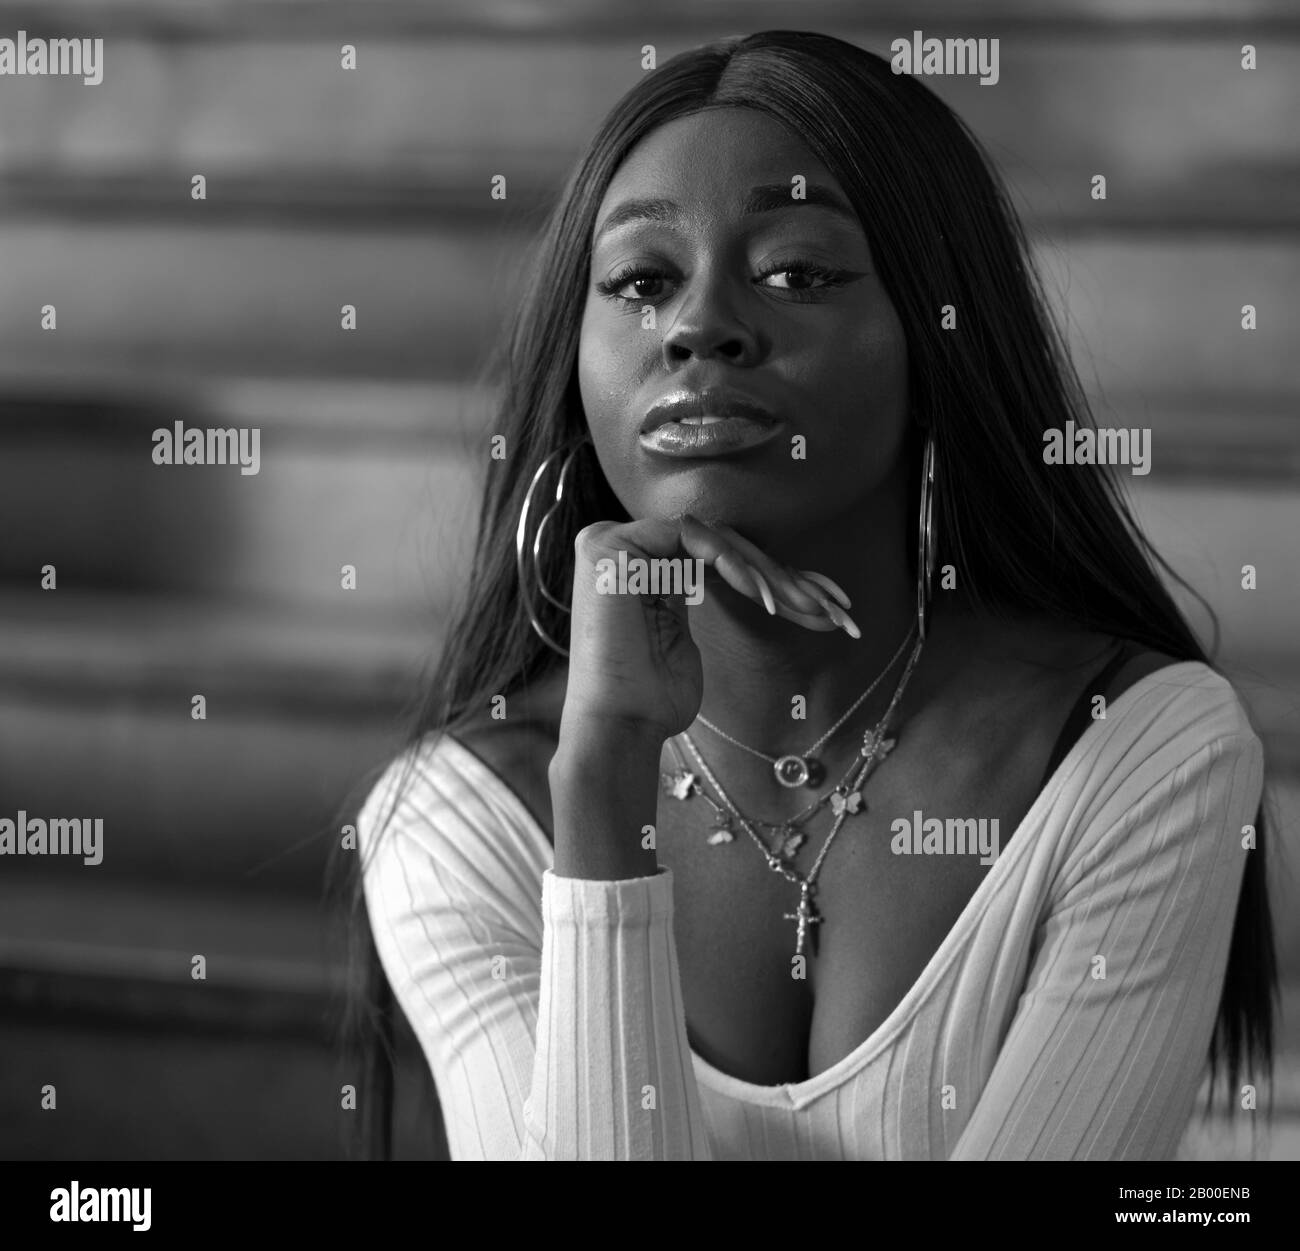 Dark-skinned young woman, portrait, black and white, Duesseldorf, Germany Stock Photo